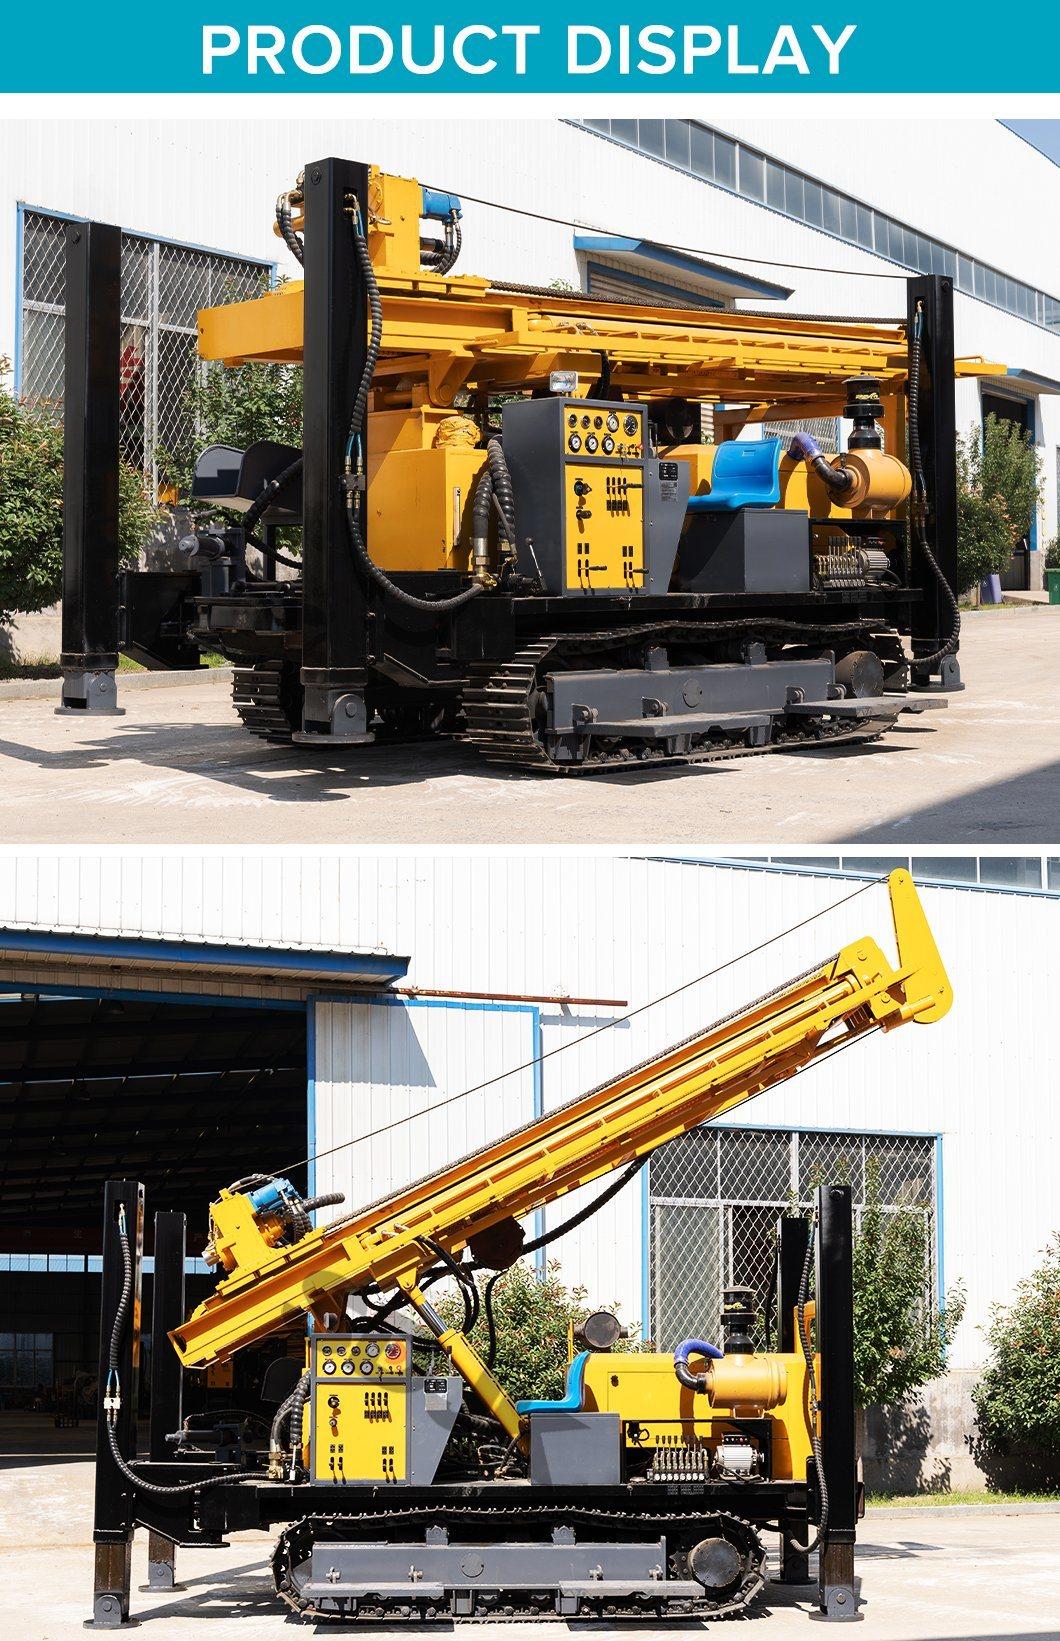 Chinese Water Well Drilling Rig with Air Compressor Good Price